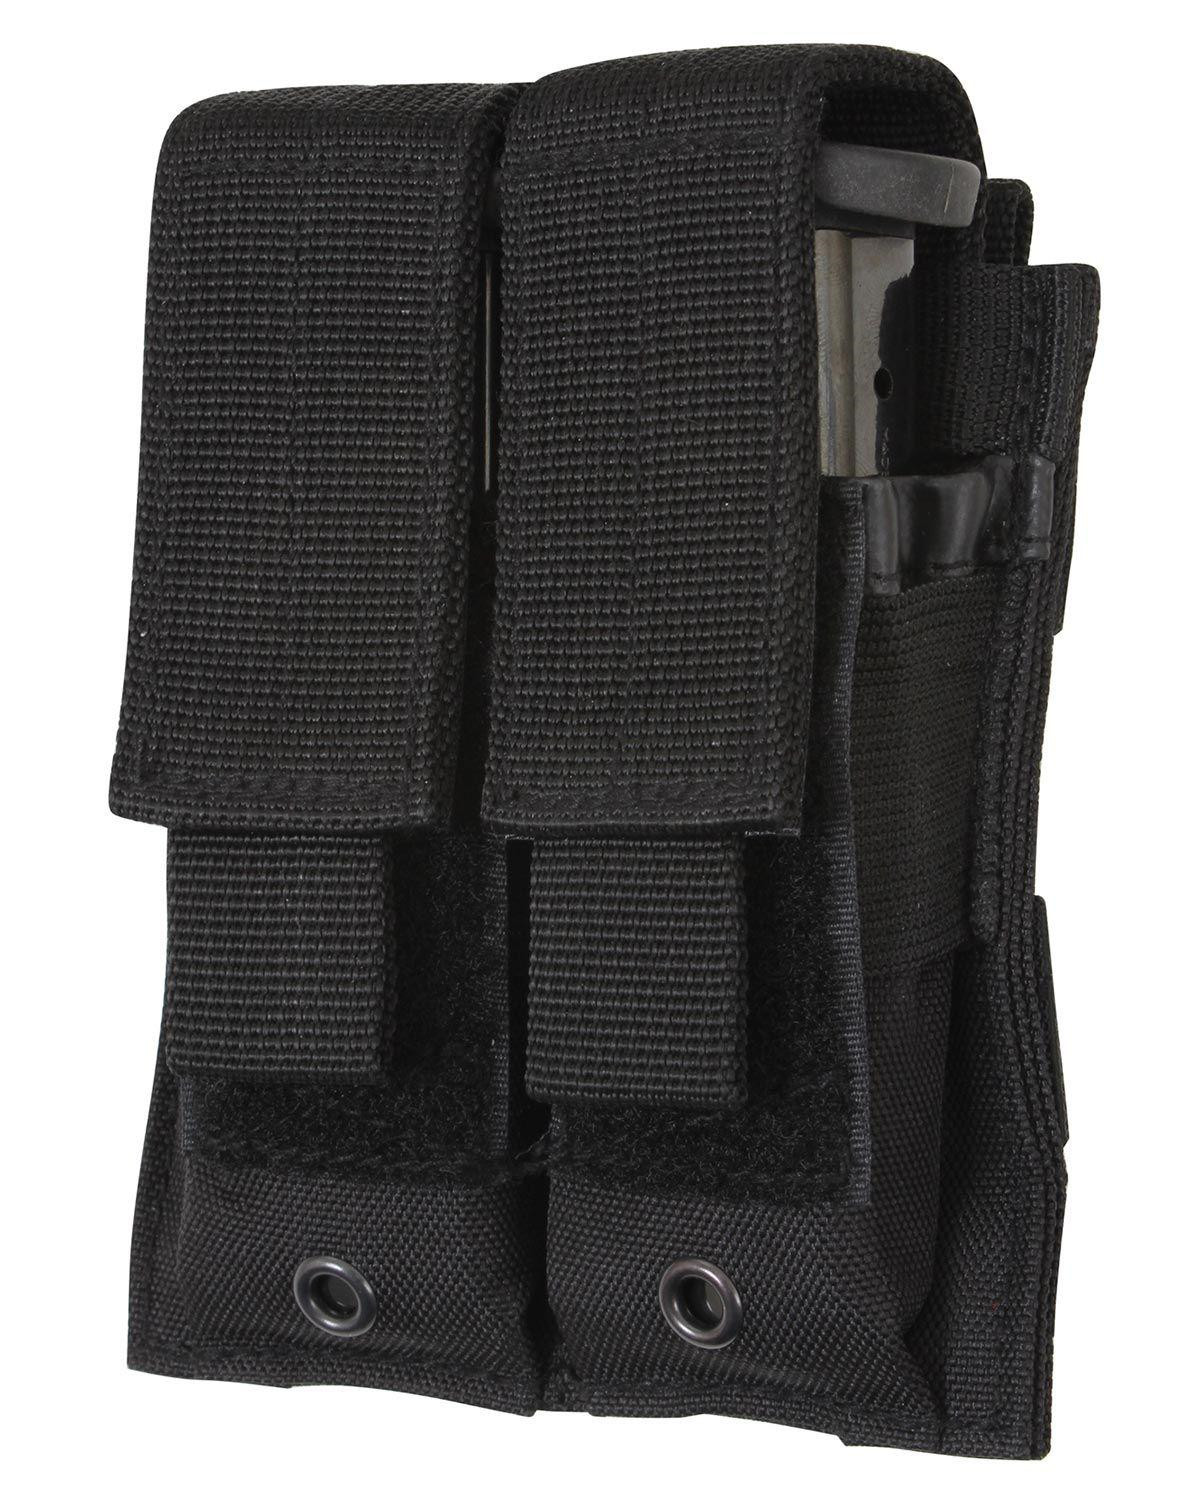 Rothco Double Pistol Pouch - Molle (Sort, One Size)